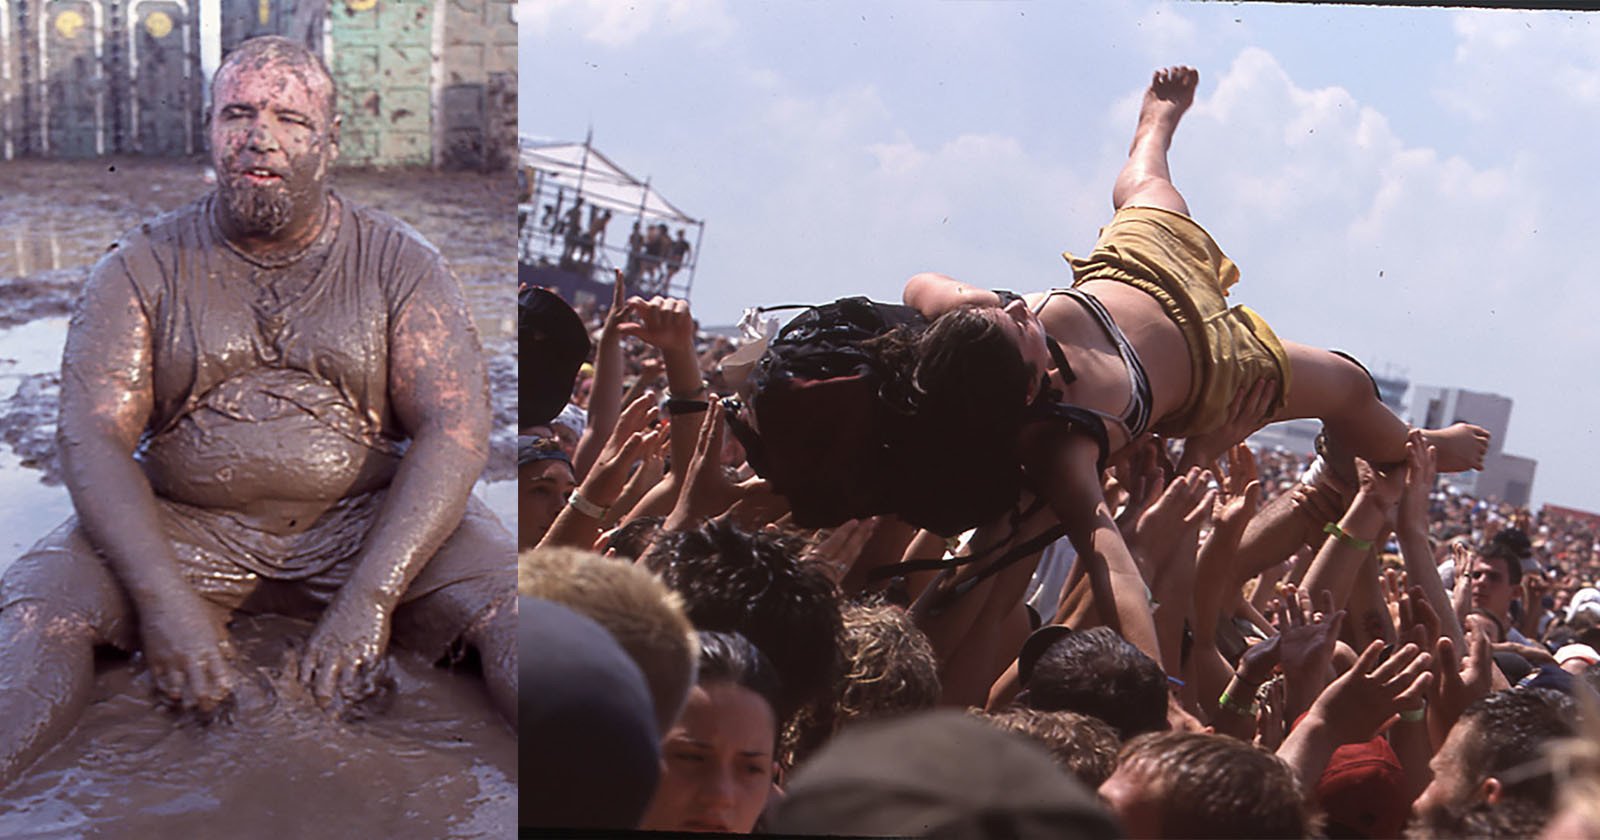 I Knew Bad Things Were Happening: Photographer Recounts Woodstock 99